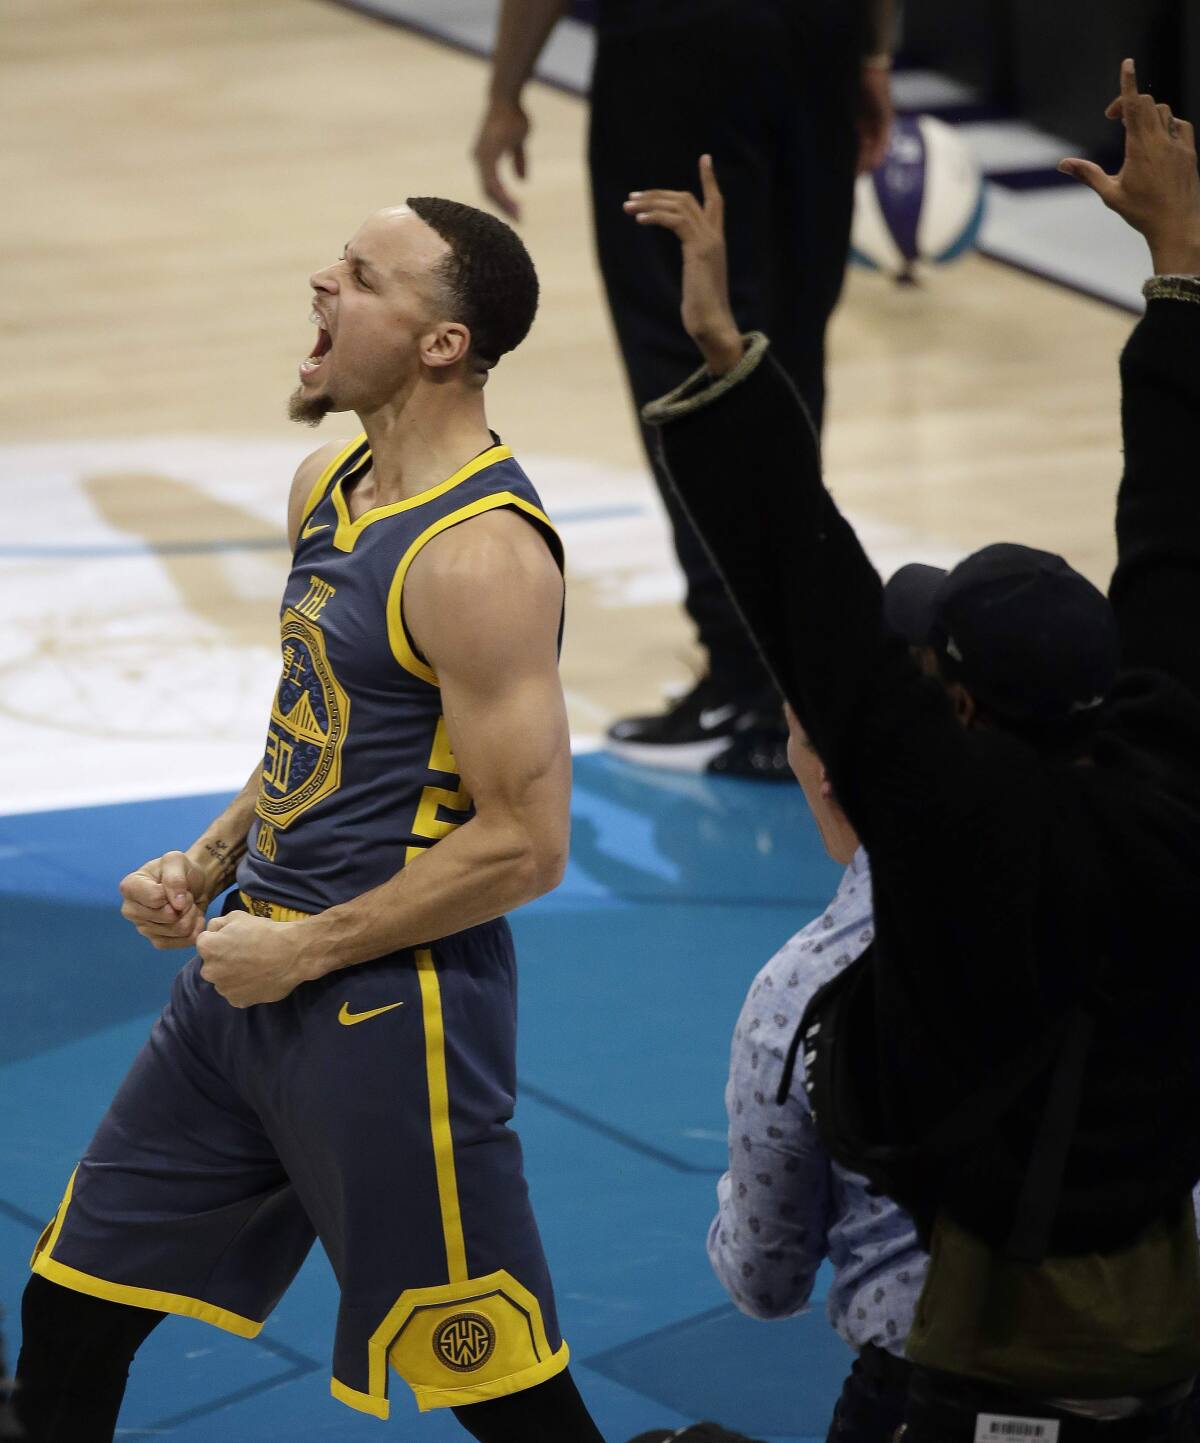 Steph Curry, Seth Curry Bet Family Tickets in All-Star 3-Point Contest